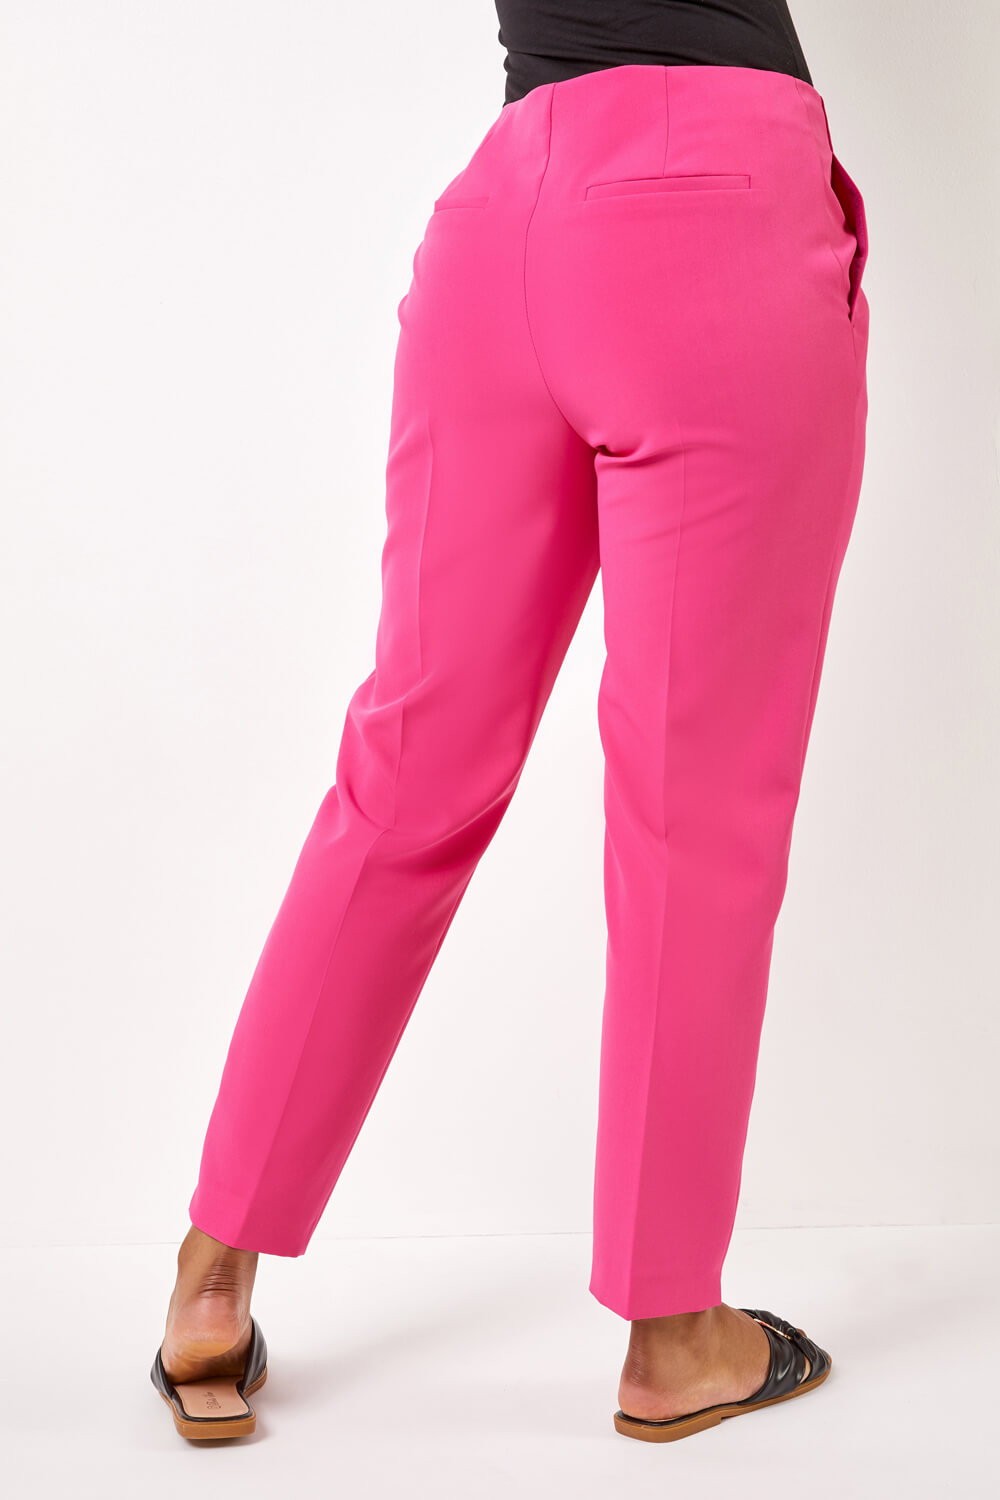 PINK Petite Soft Jersey Tapered Trouser, Image 2 of 4